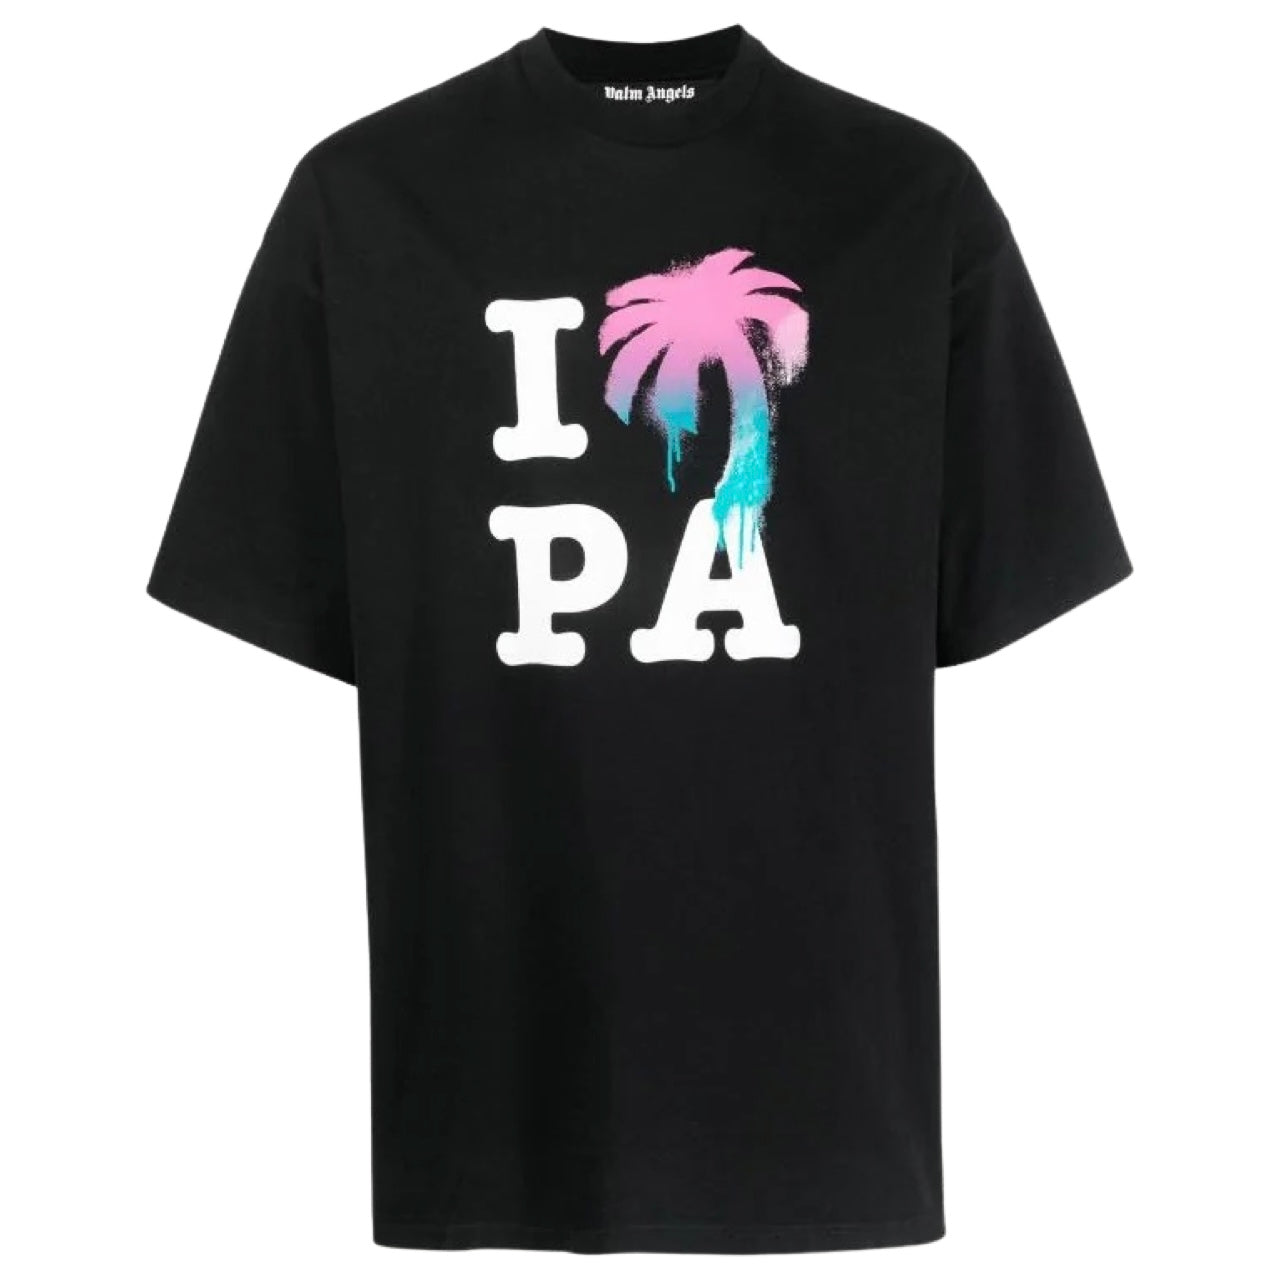 Palm Angels T-shirt in black